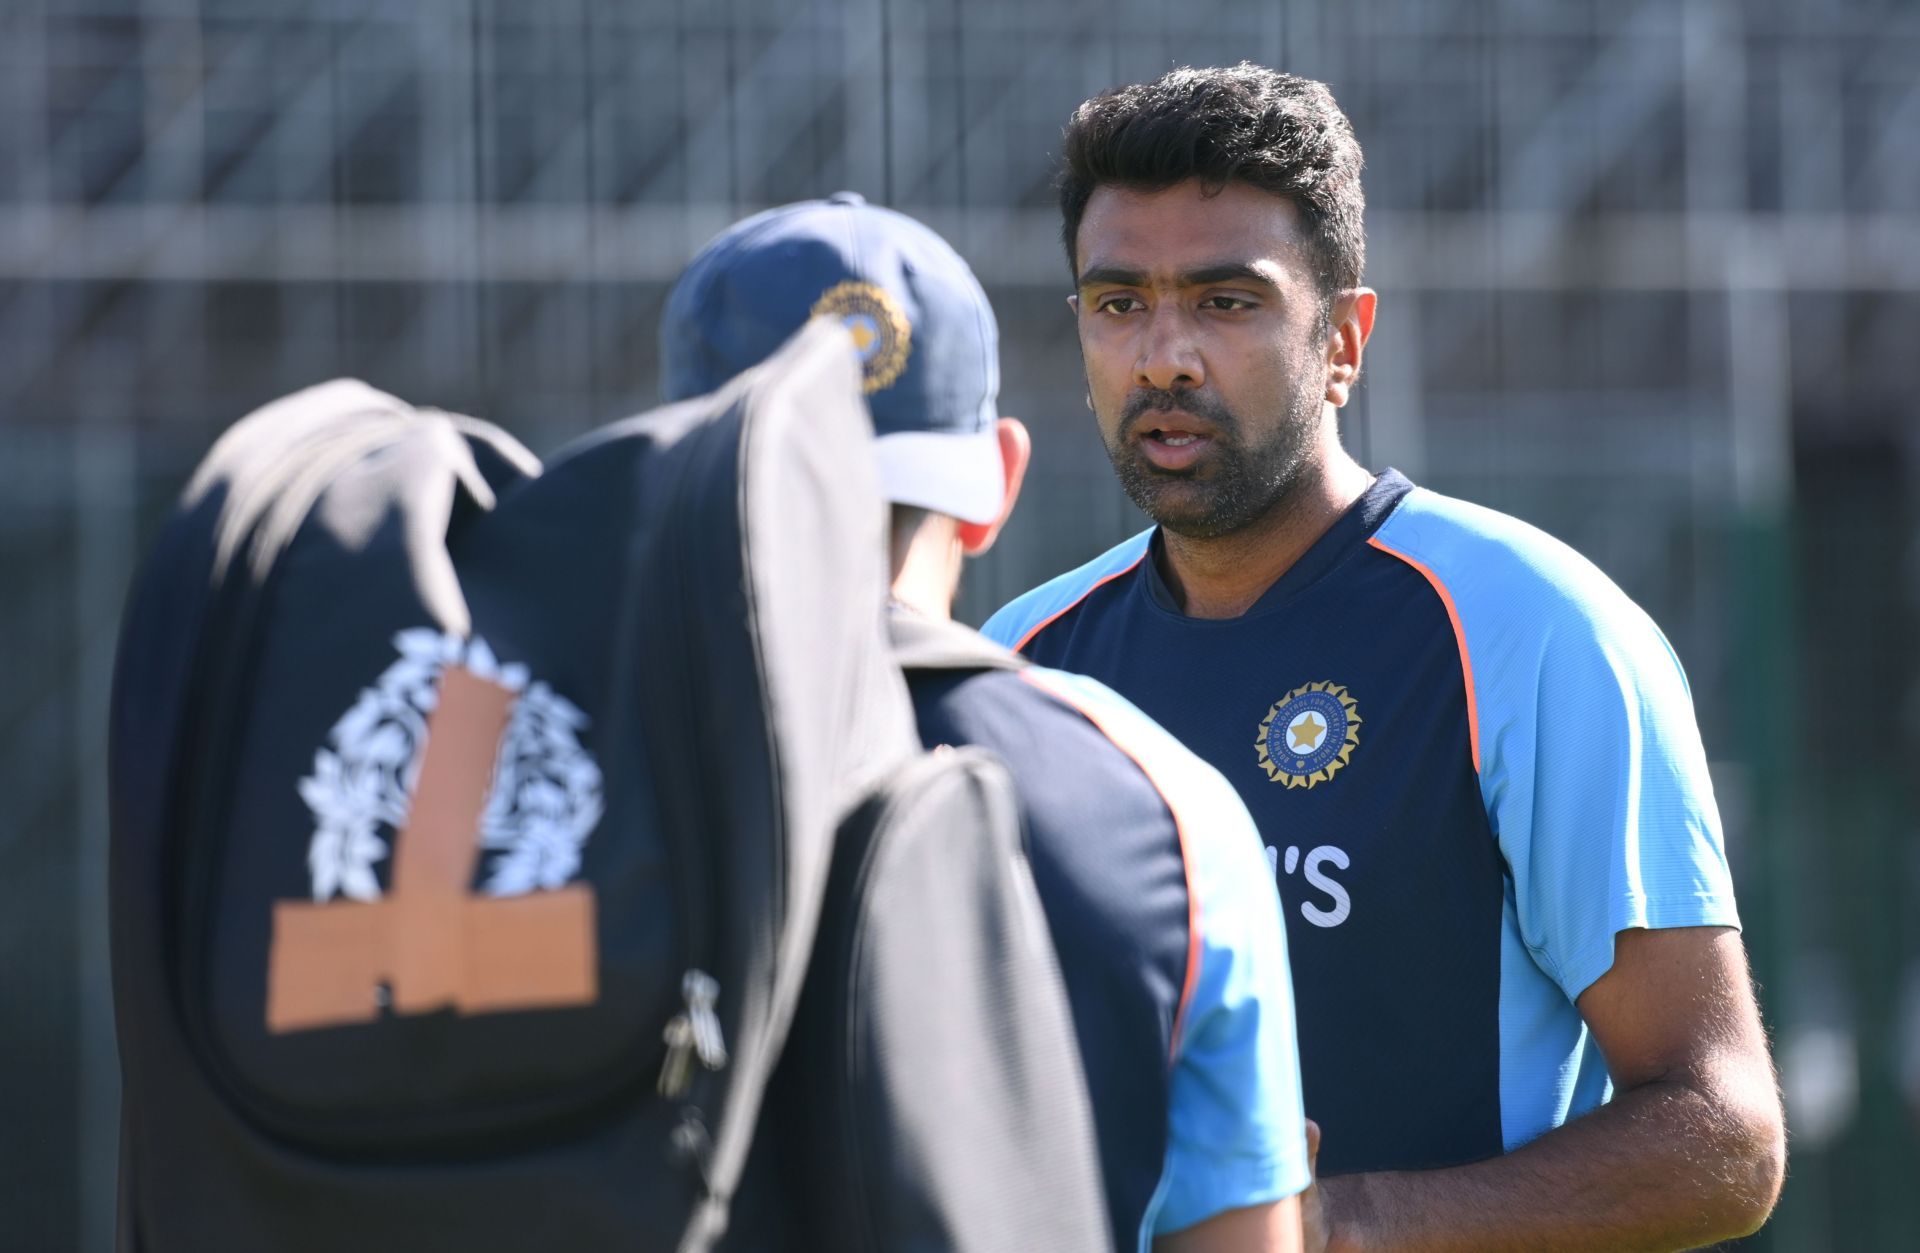 Ravichandran Ashwin has returned to the Indian team for the first match of the ongoing ICC Cricket World Cup Super League series against South Africa